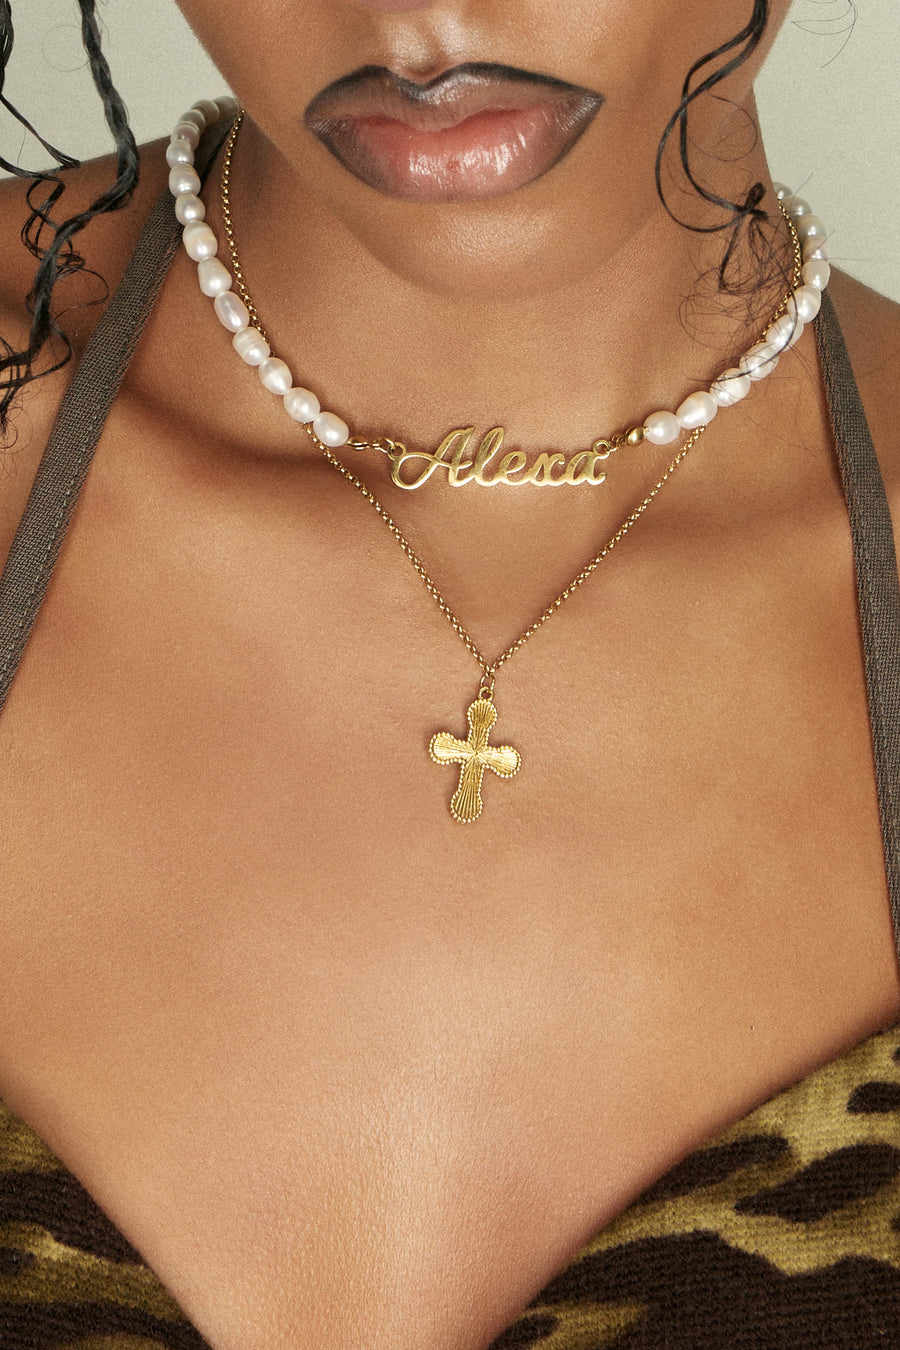 The Customized Pearl Kette